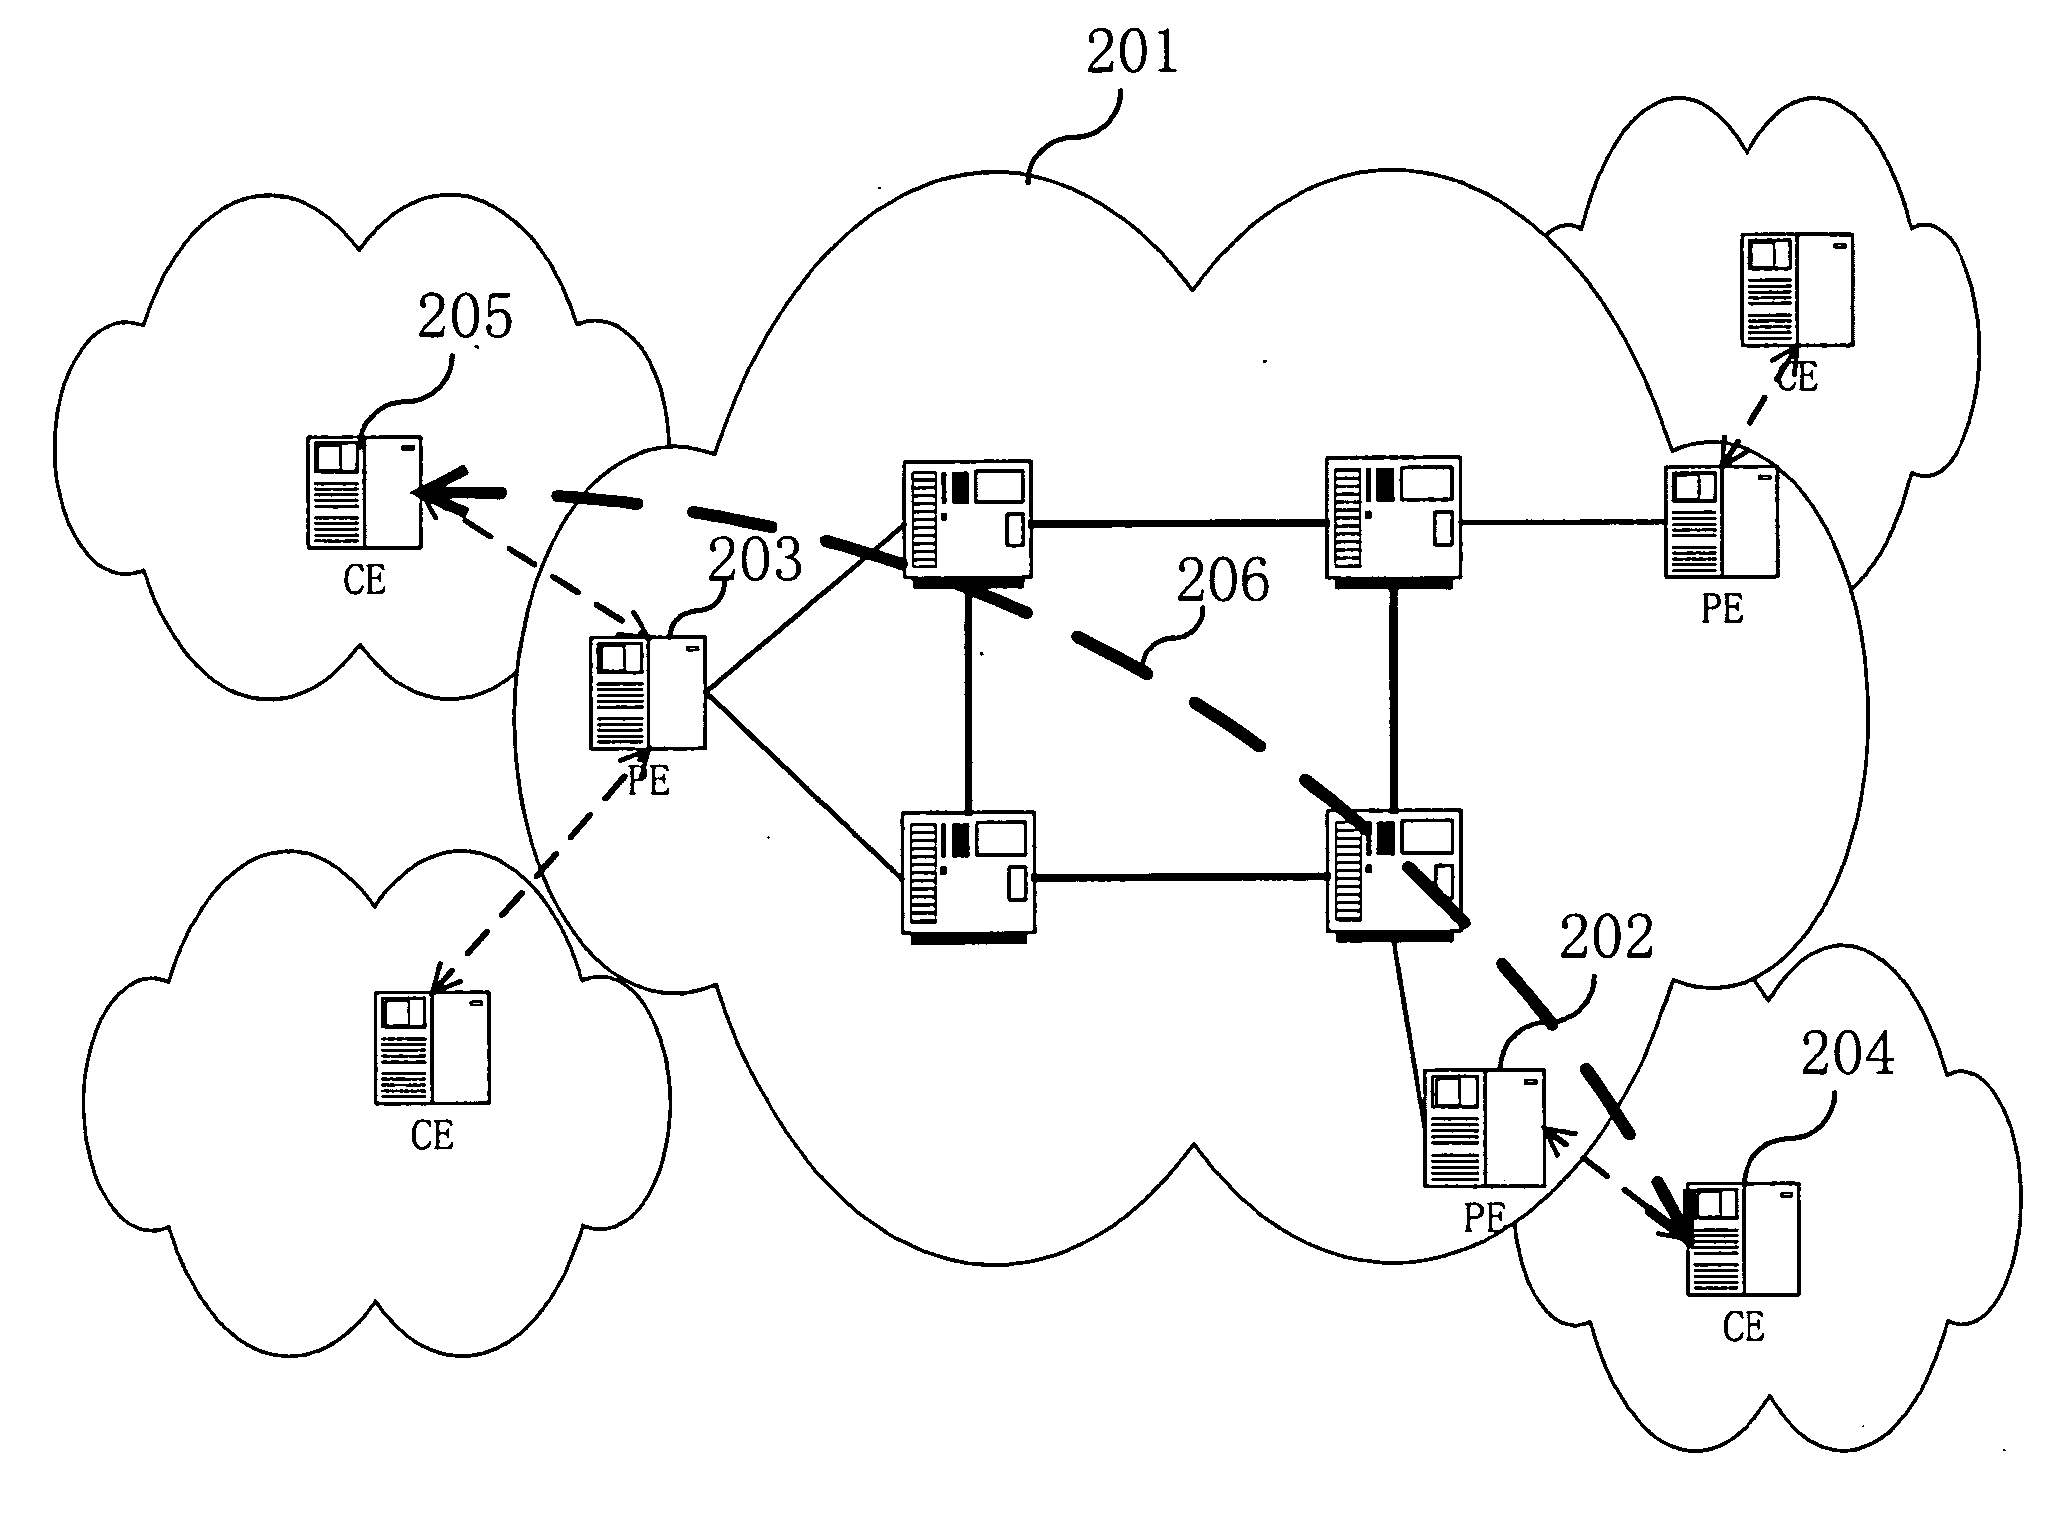 Method of implementing PSEUDO wire emulation edge-to-edge protocol